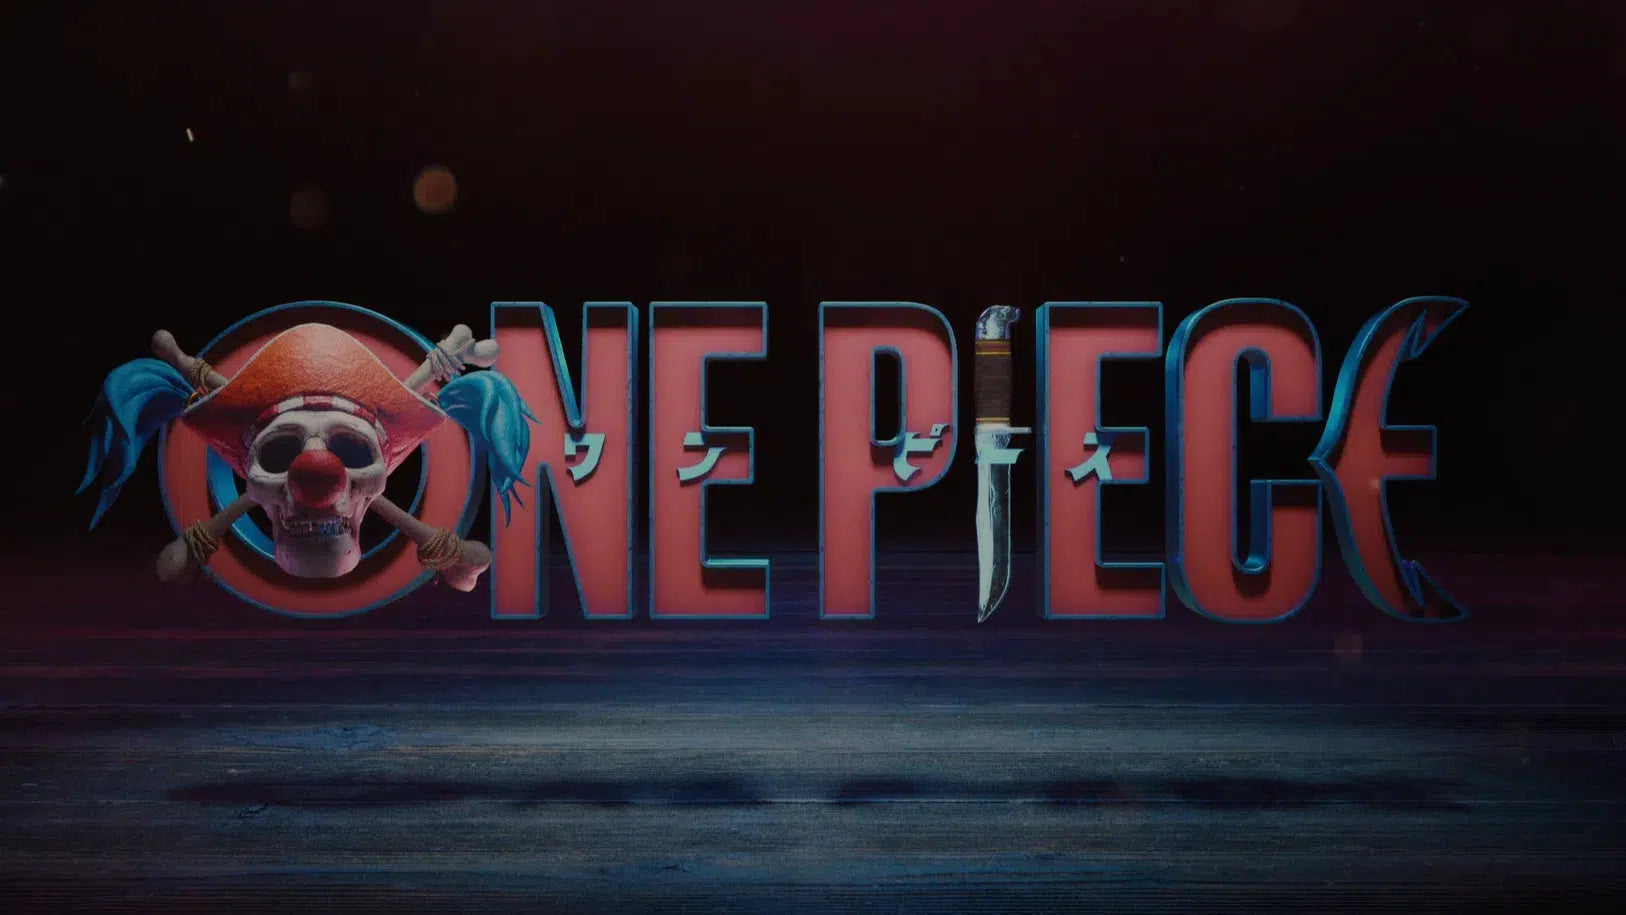 One Piece Live Action Episode 2 The Man In The Straw Hat Buggy The Clown Episode Logo